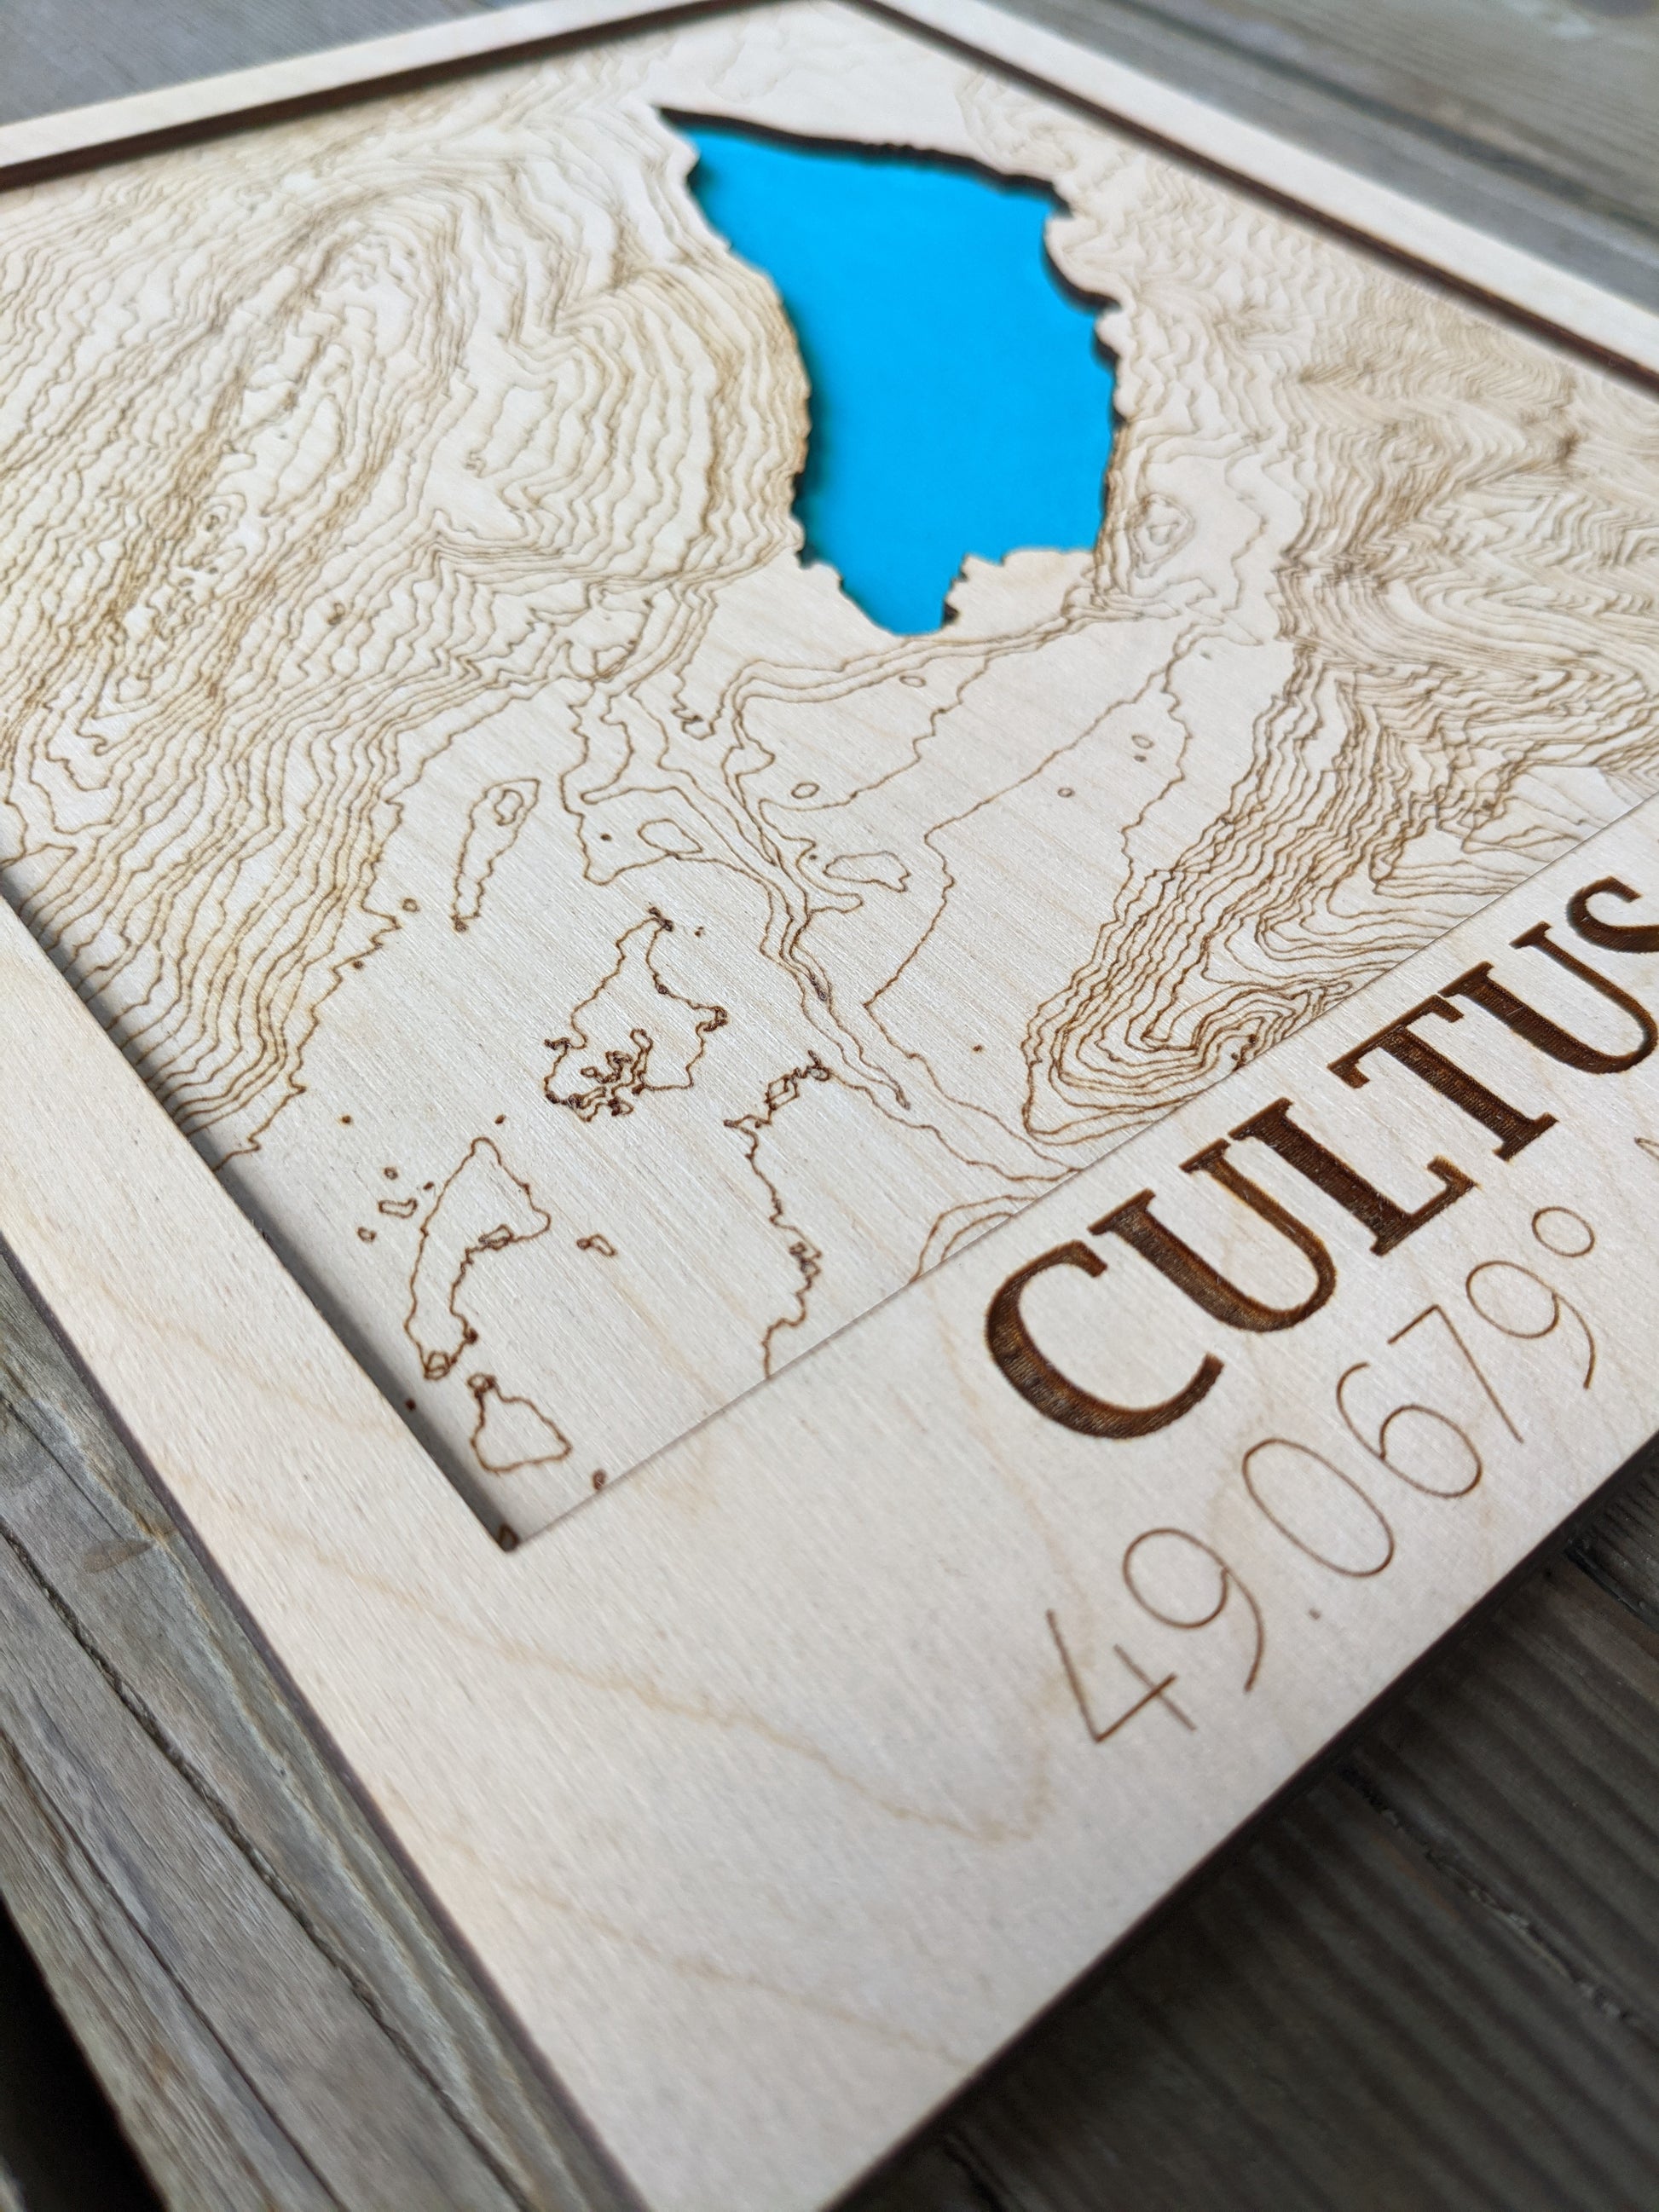 Cultus Lake Wooden Topographic Map Map 50.00